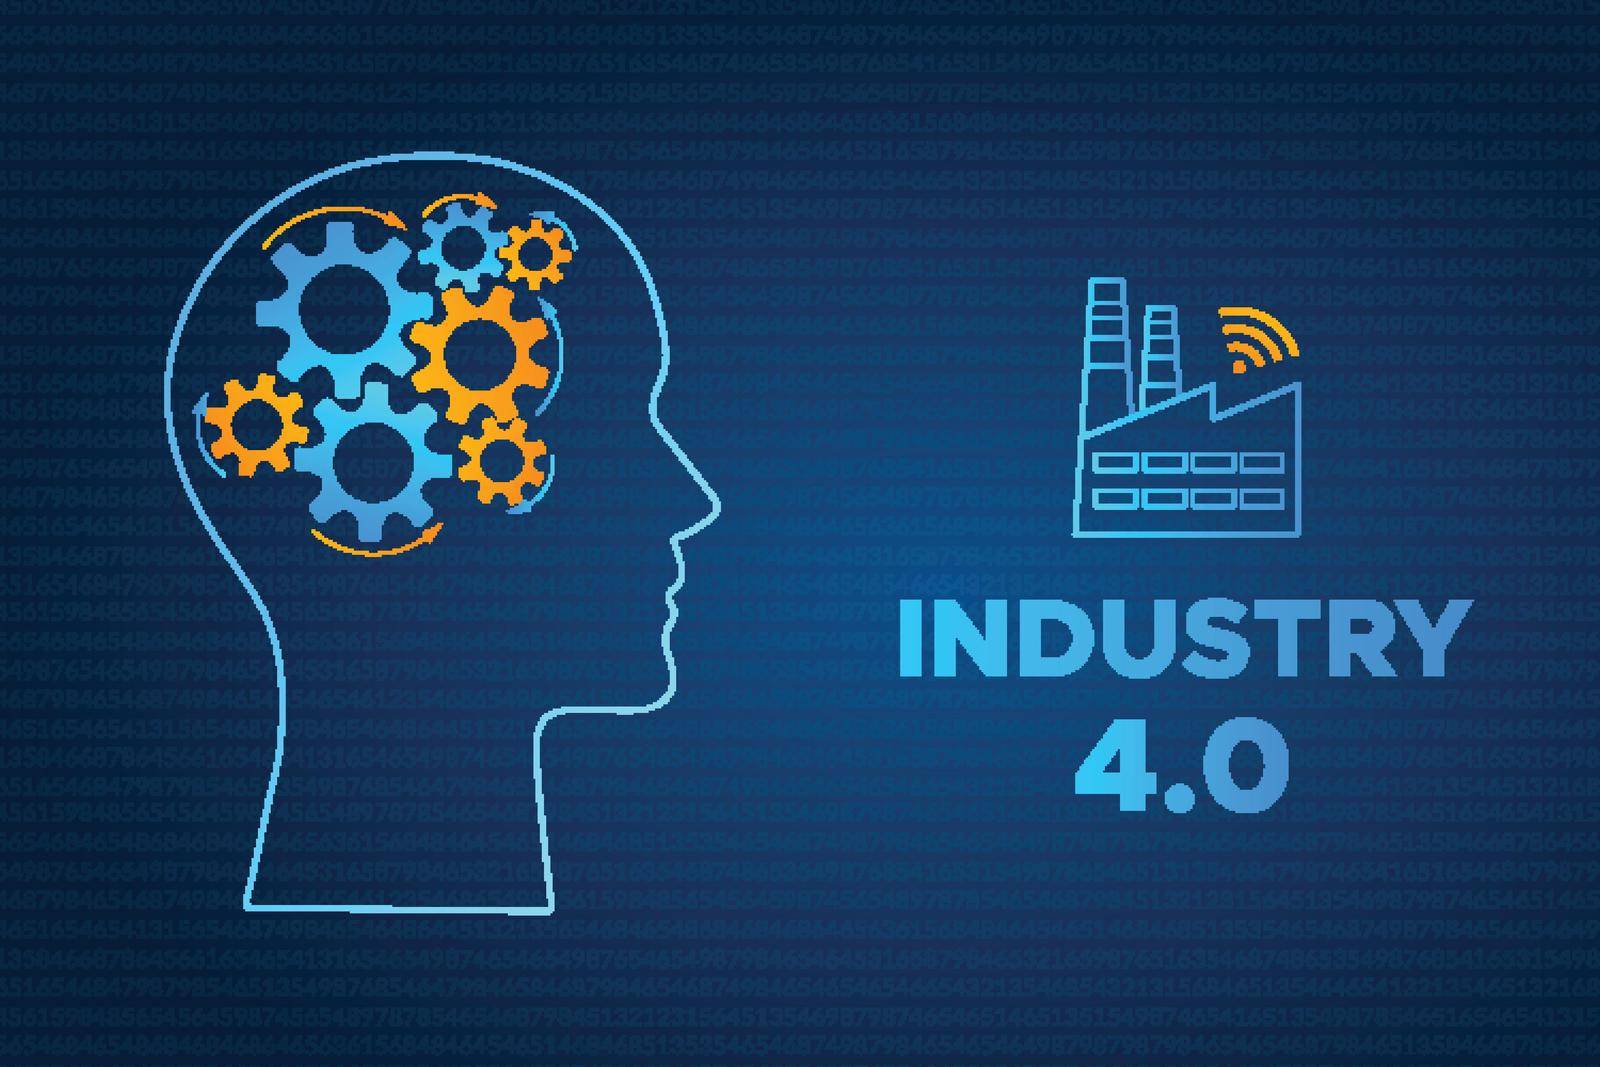 Head silhouette industry 4.0 revolution concept by moonnoon